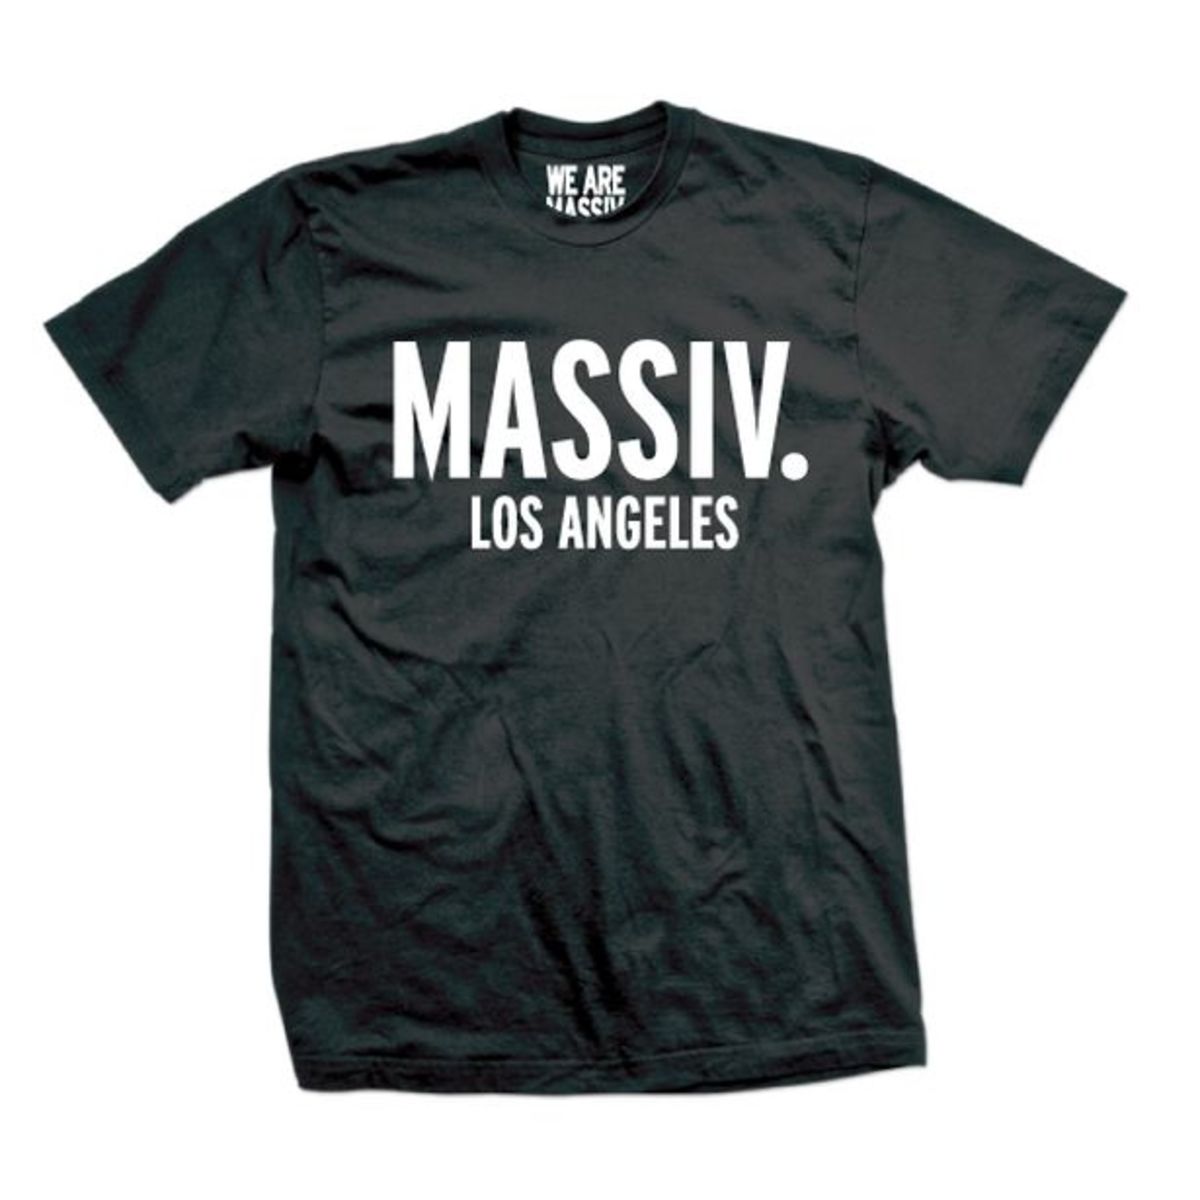 EDM Culture: Massiv Clothing Is Documenting Lifestyle, Fashion, Culture, Art, Sport And Media